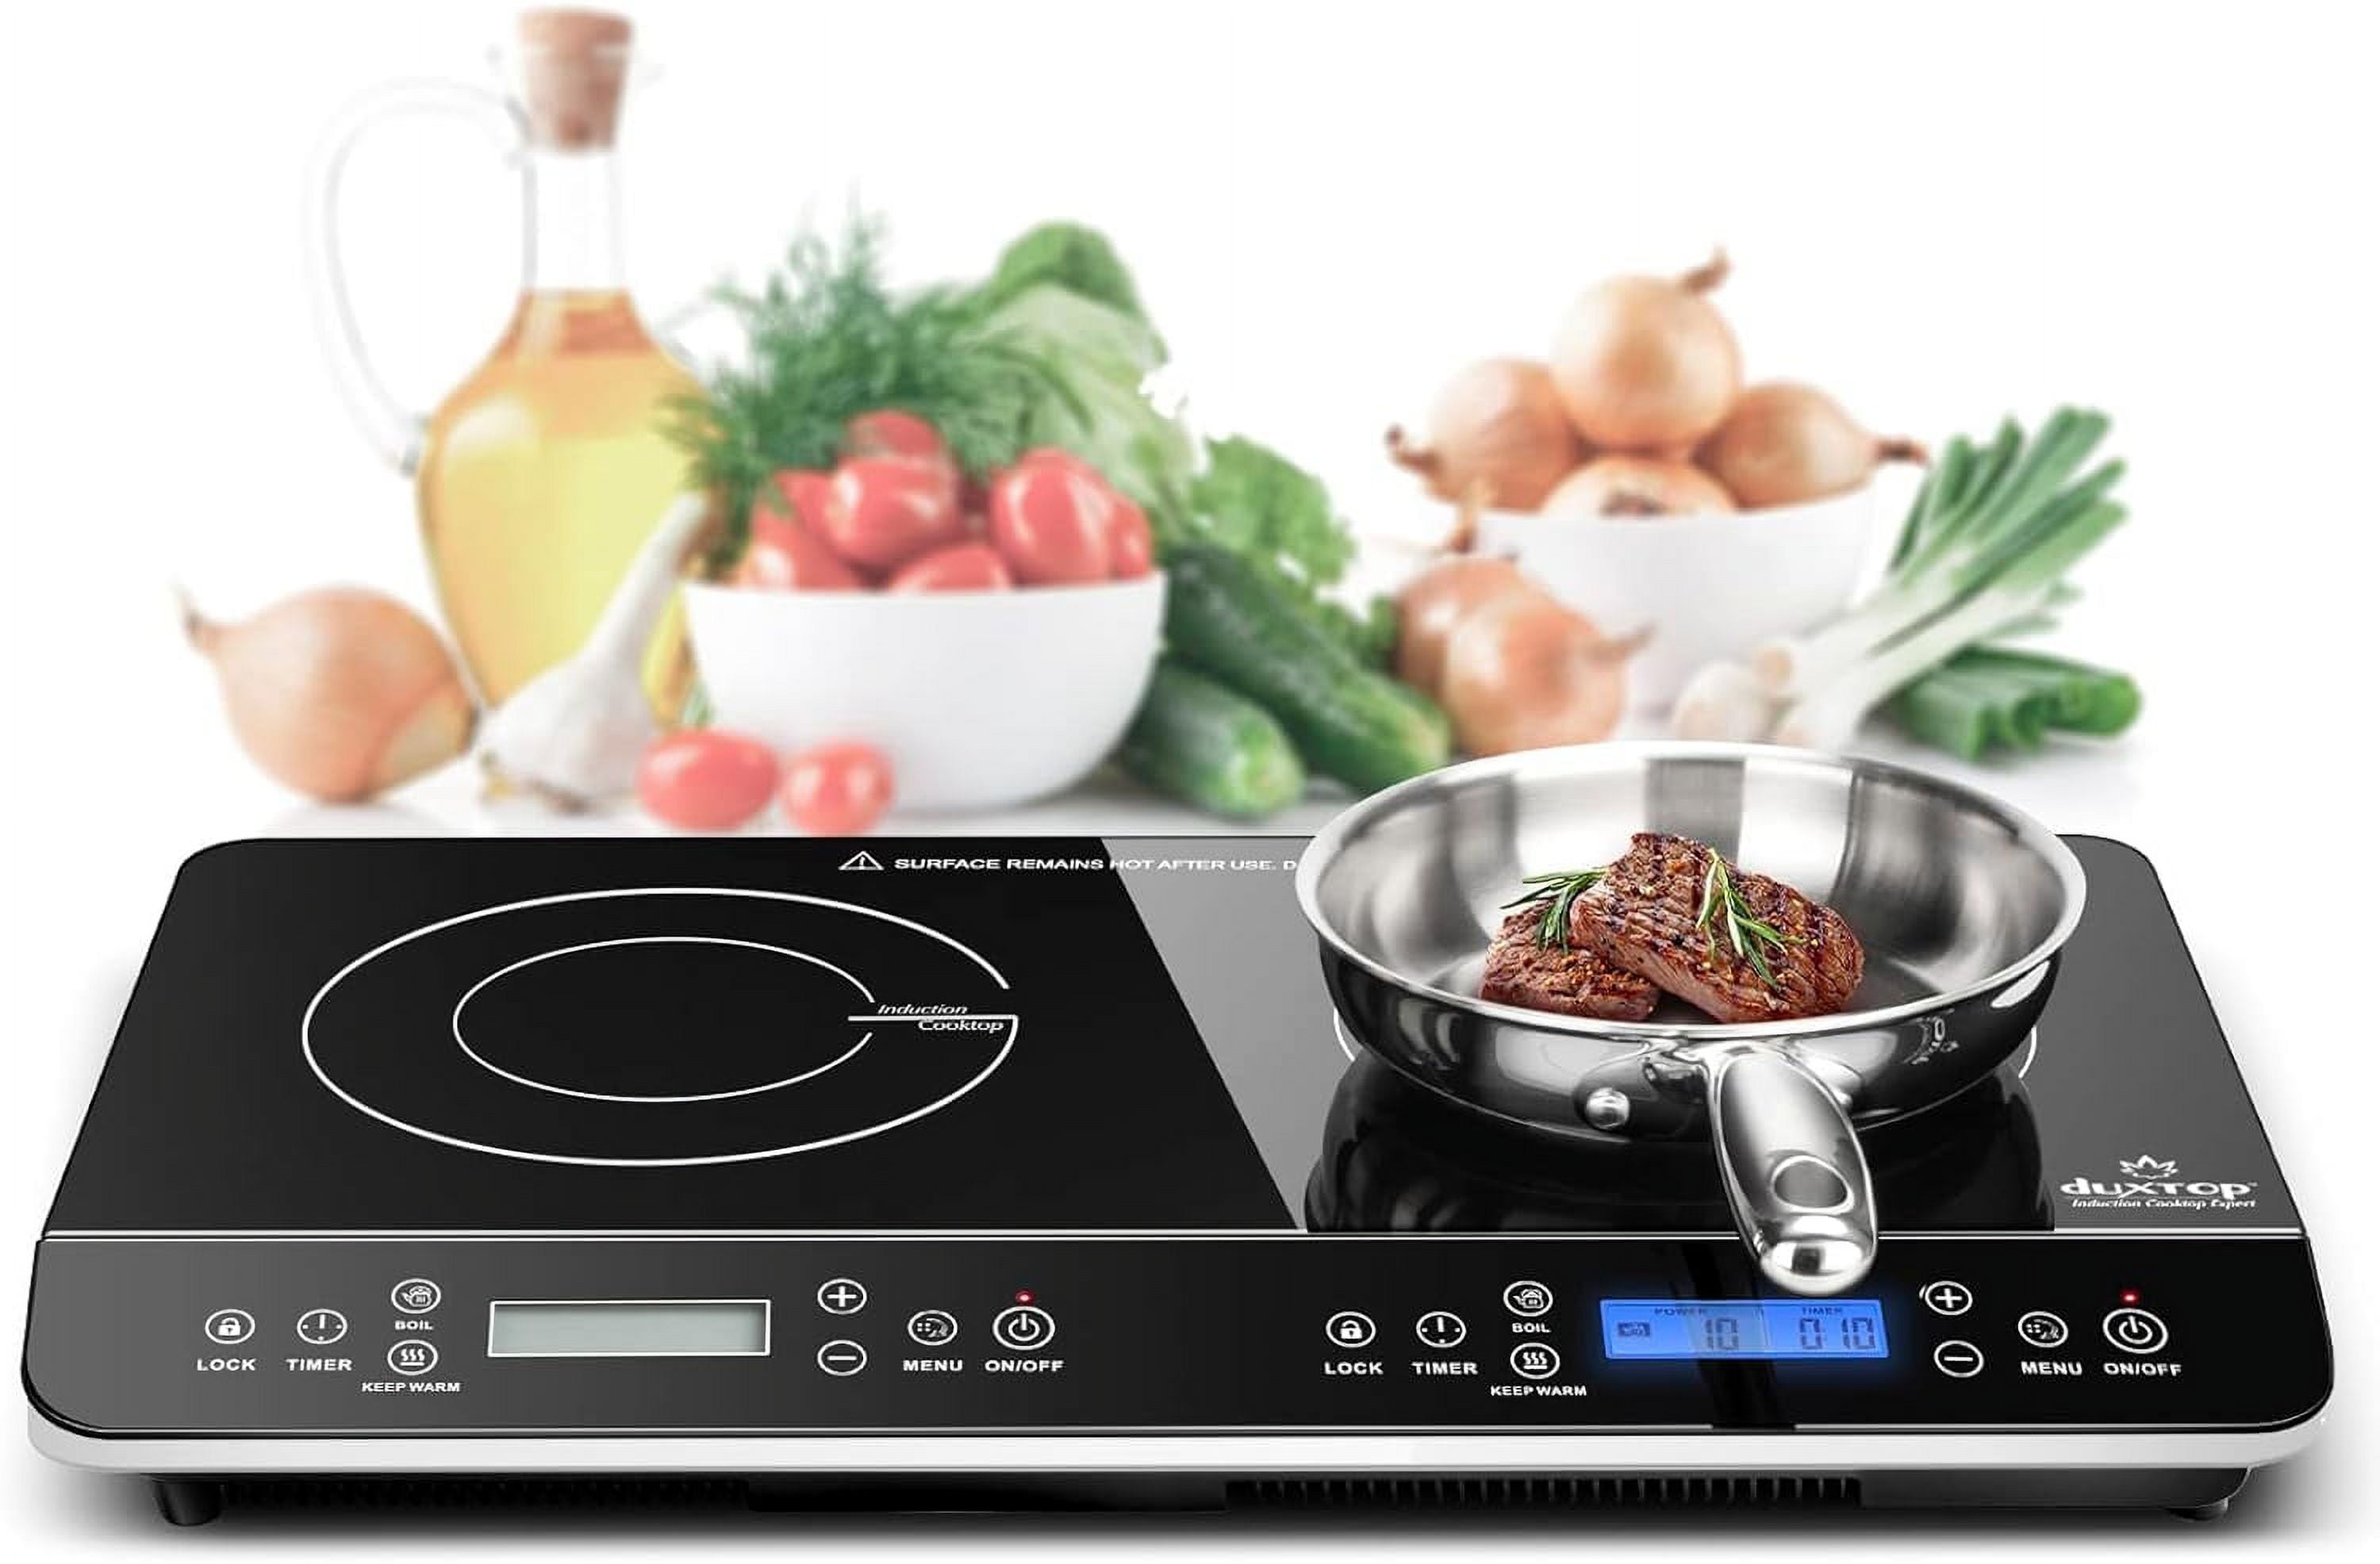 DUXTOP duxtop-E200A Duxtop Portable Induction Cooktop, High End Full Glass Induction  Burner with Sensor Touch, 1800W Countertop Burner with Stainles